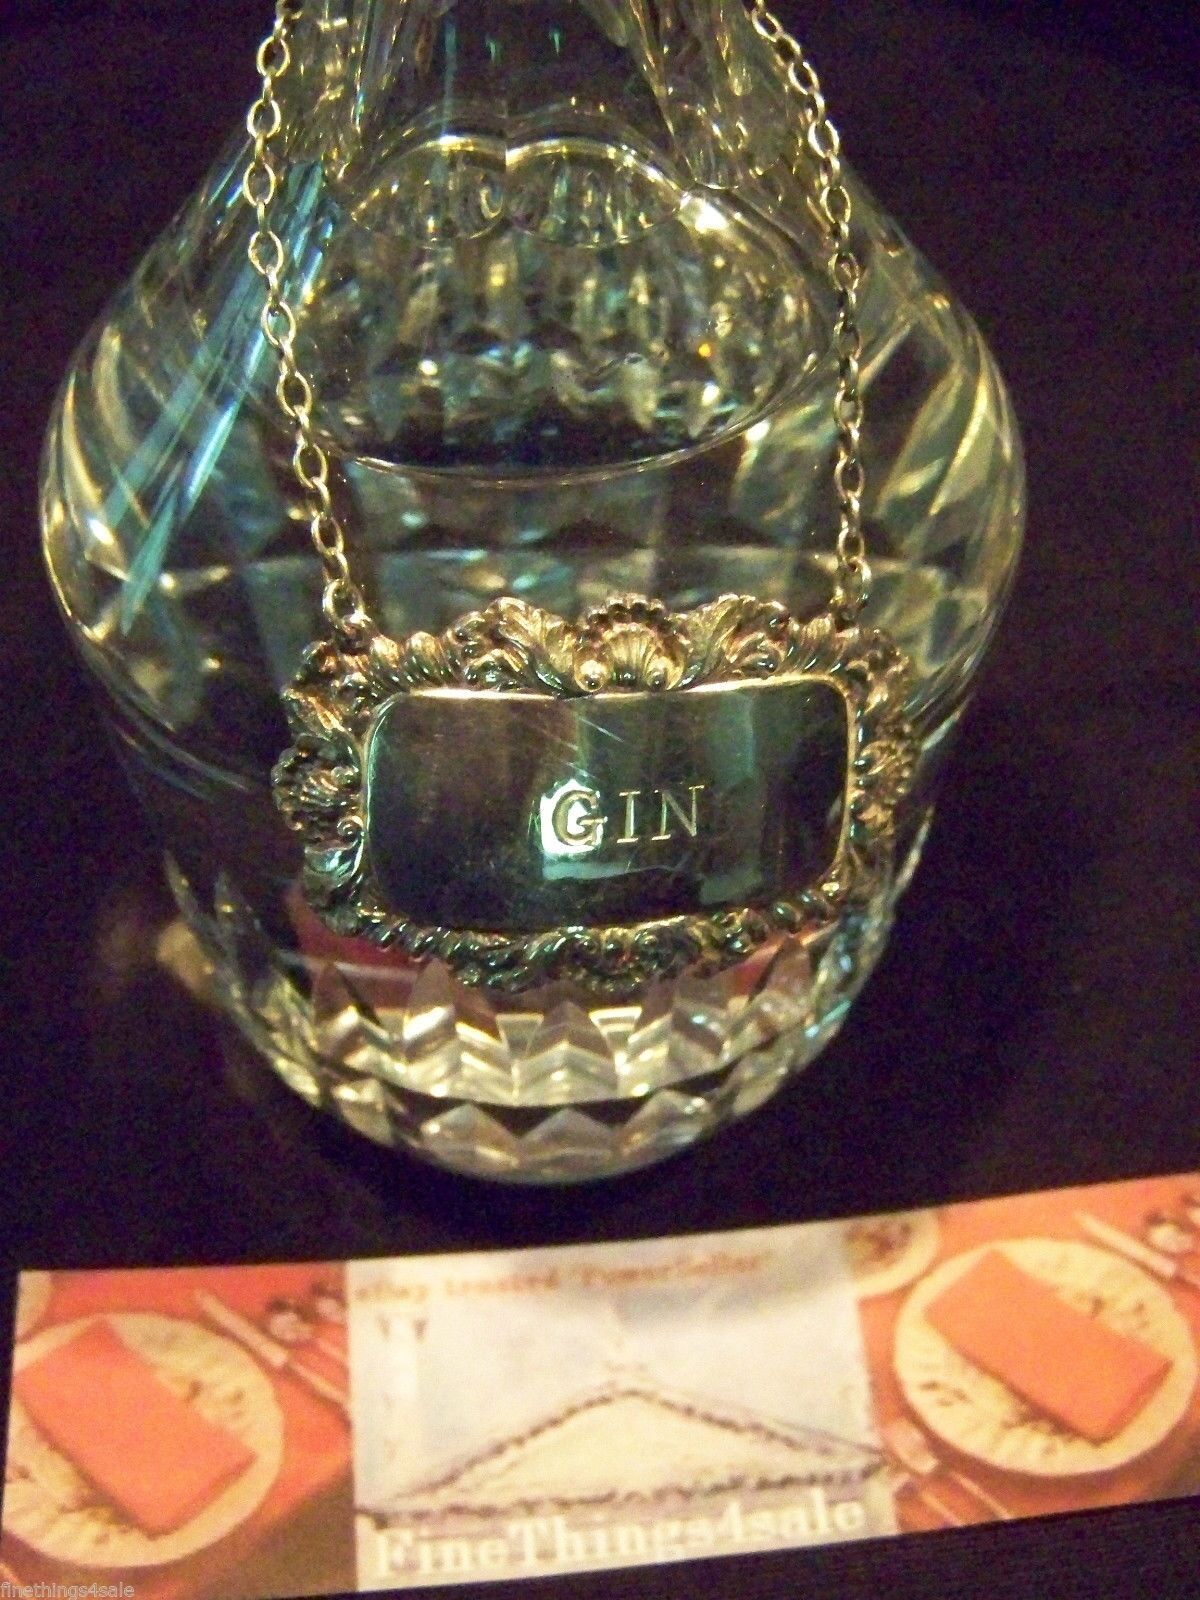 STERLING LIQUOR DECANTER LABEL TAG GEORGIAN STYLE - GIN  - OUR FineThings4sale